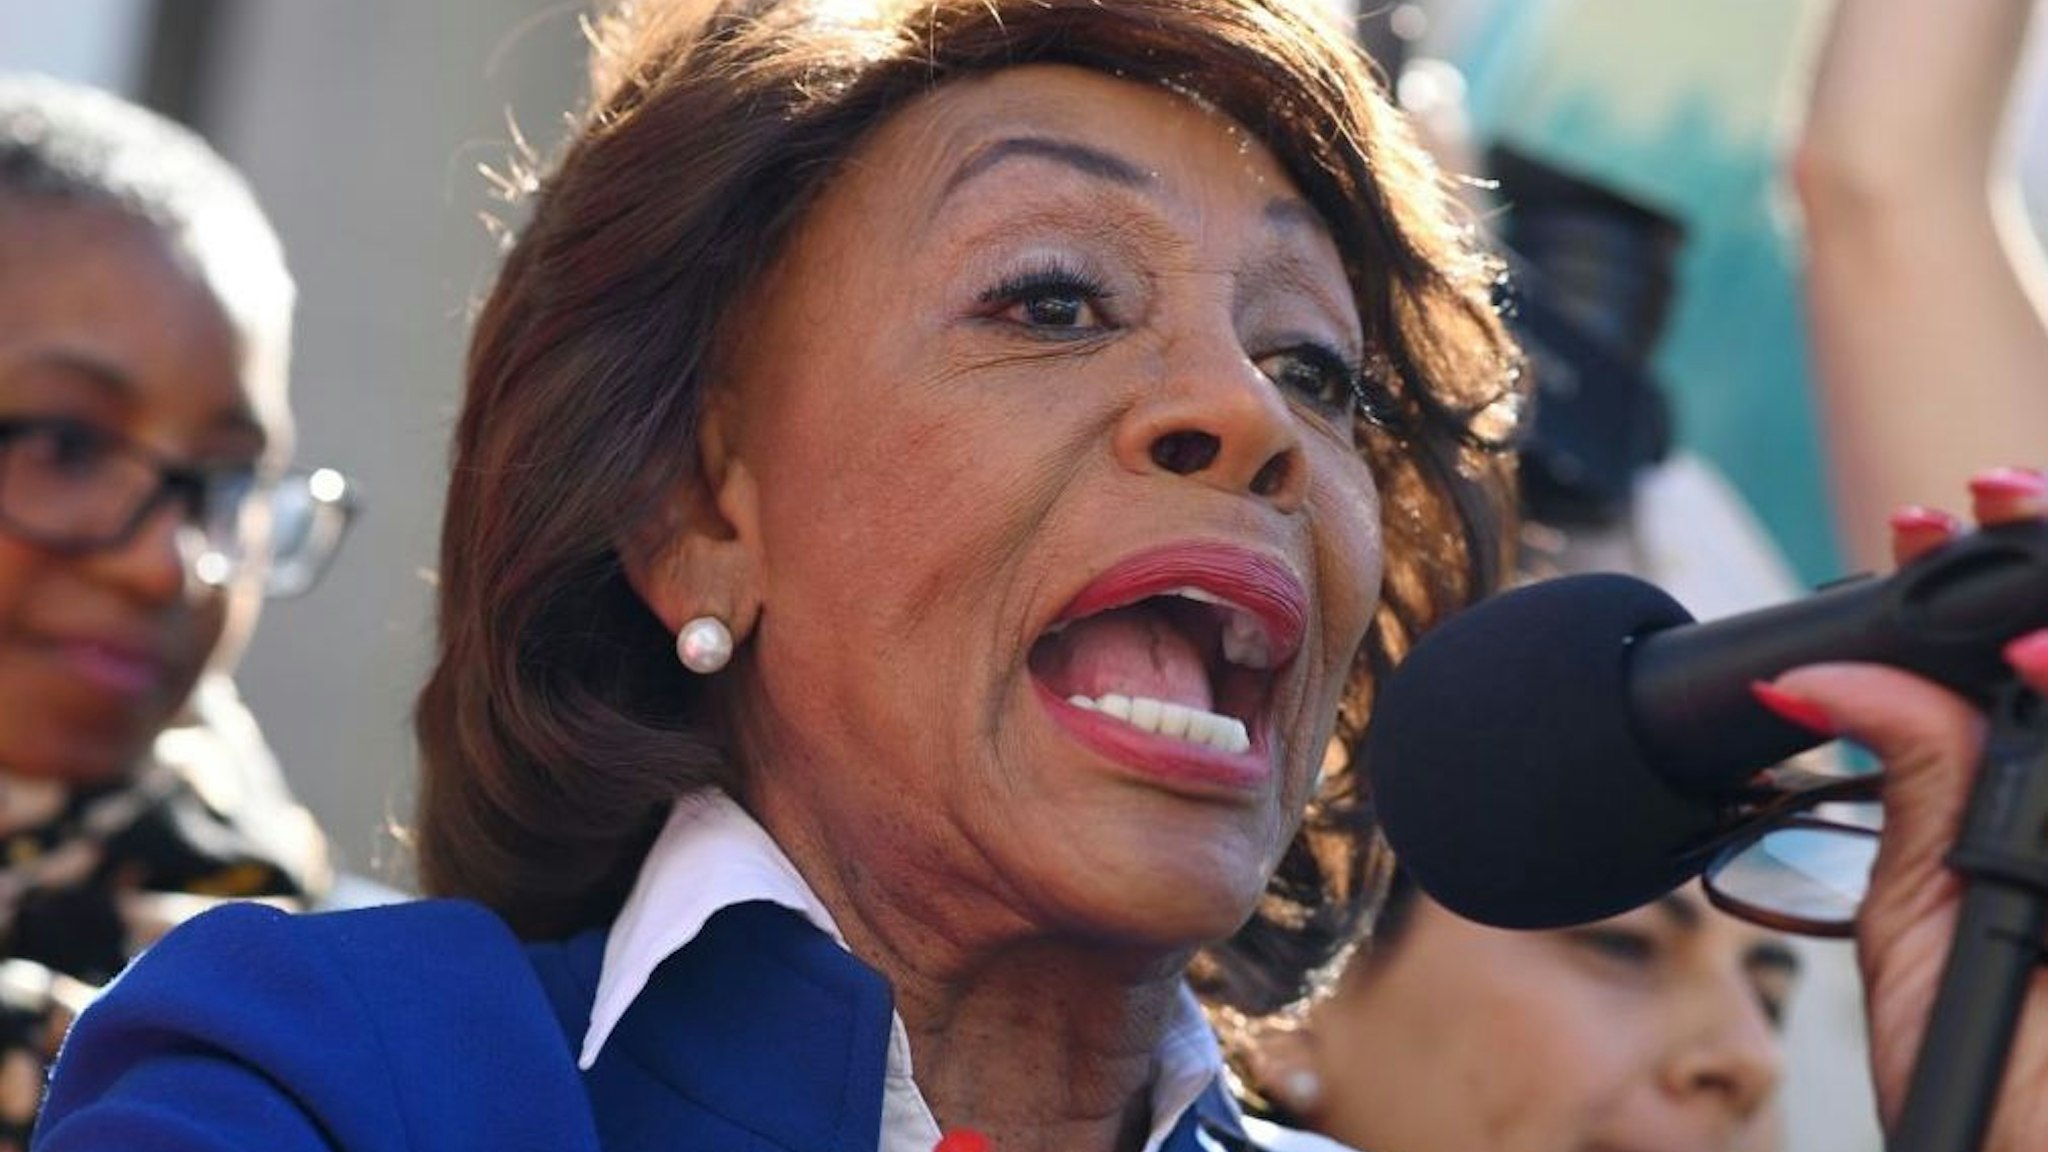 U.S. Rep. Maxine Waters (D-Calif.) speaks at a protest against U.S. President Donald Trump's National Emergency declaration, February 18, 2019, outside City Hall in Los Angeles, California.